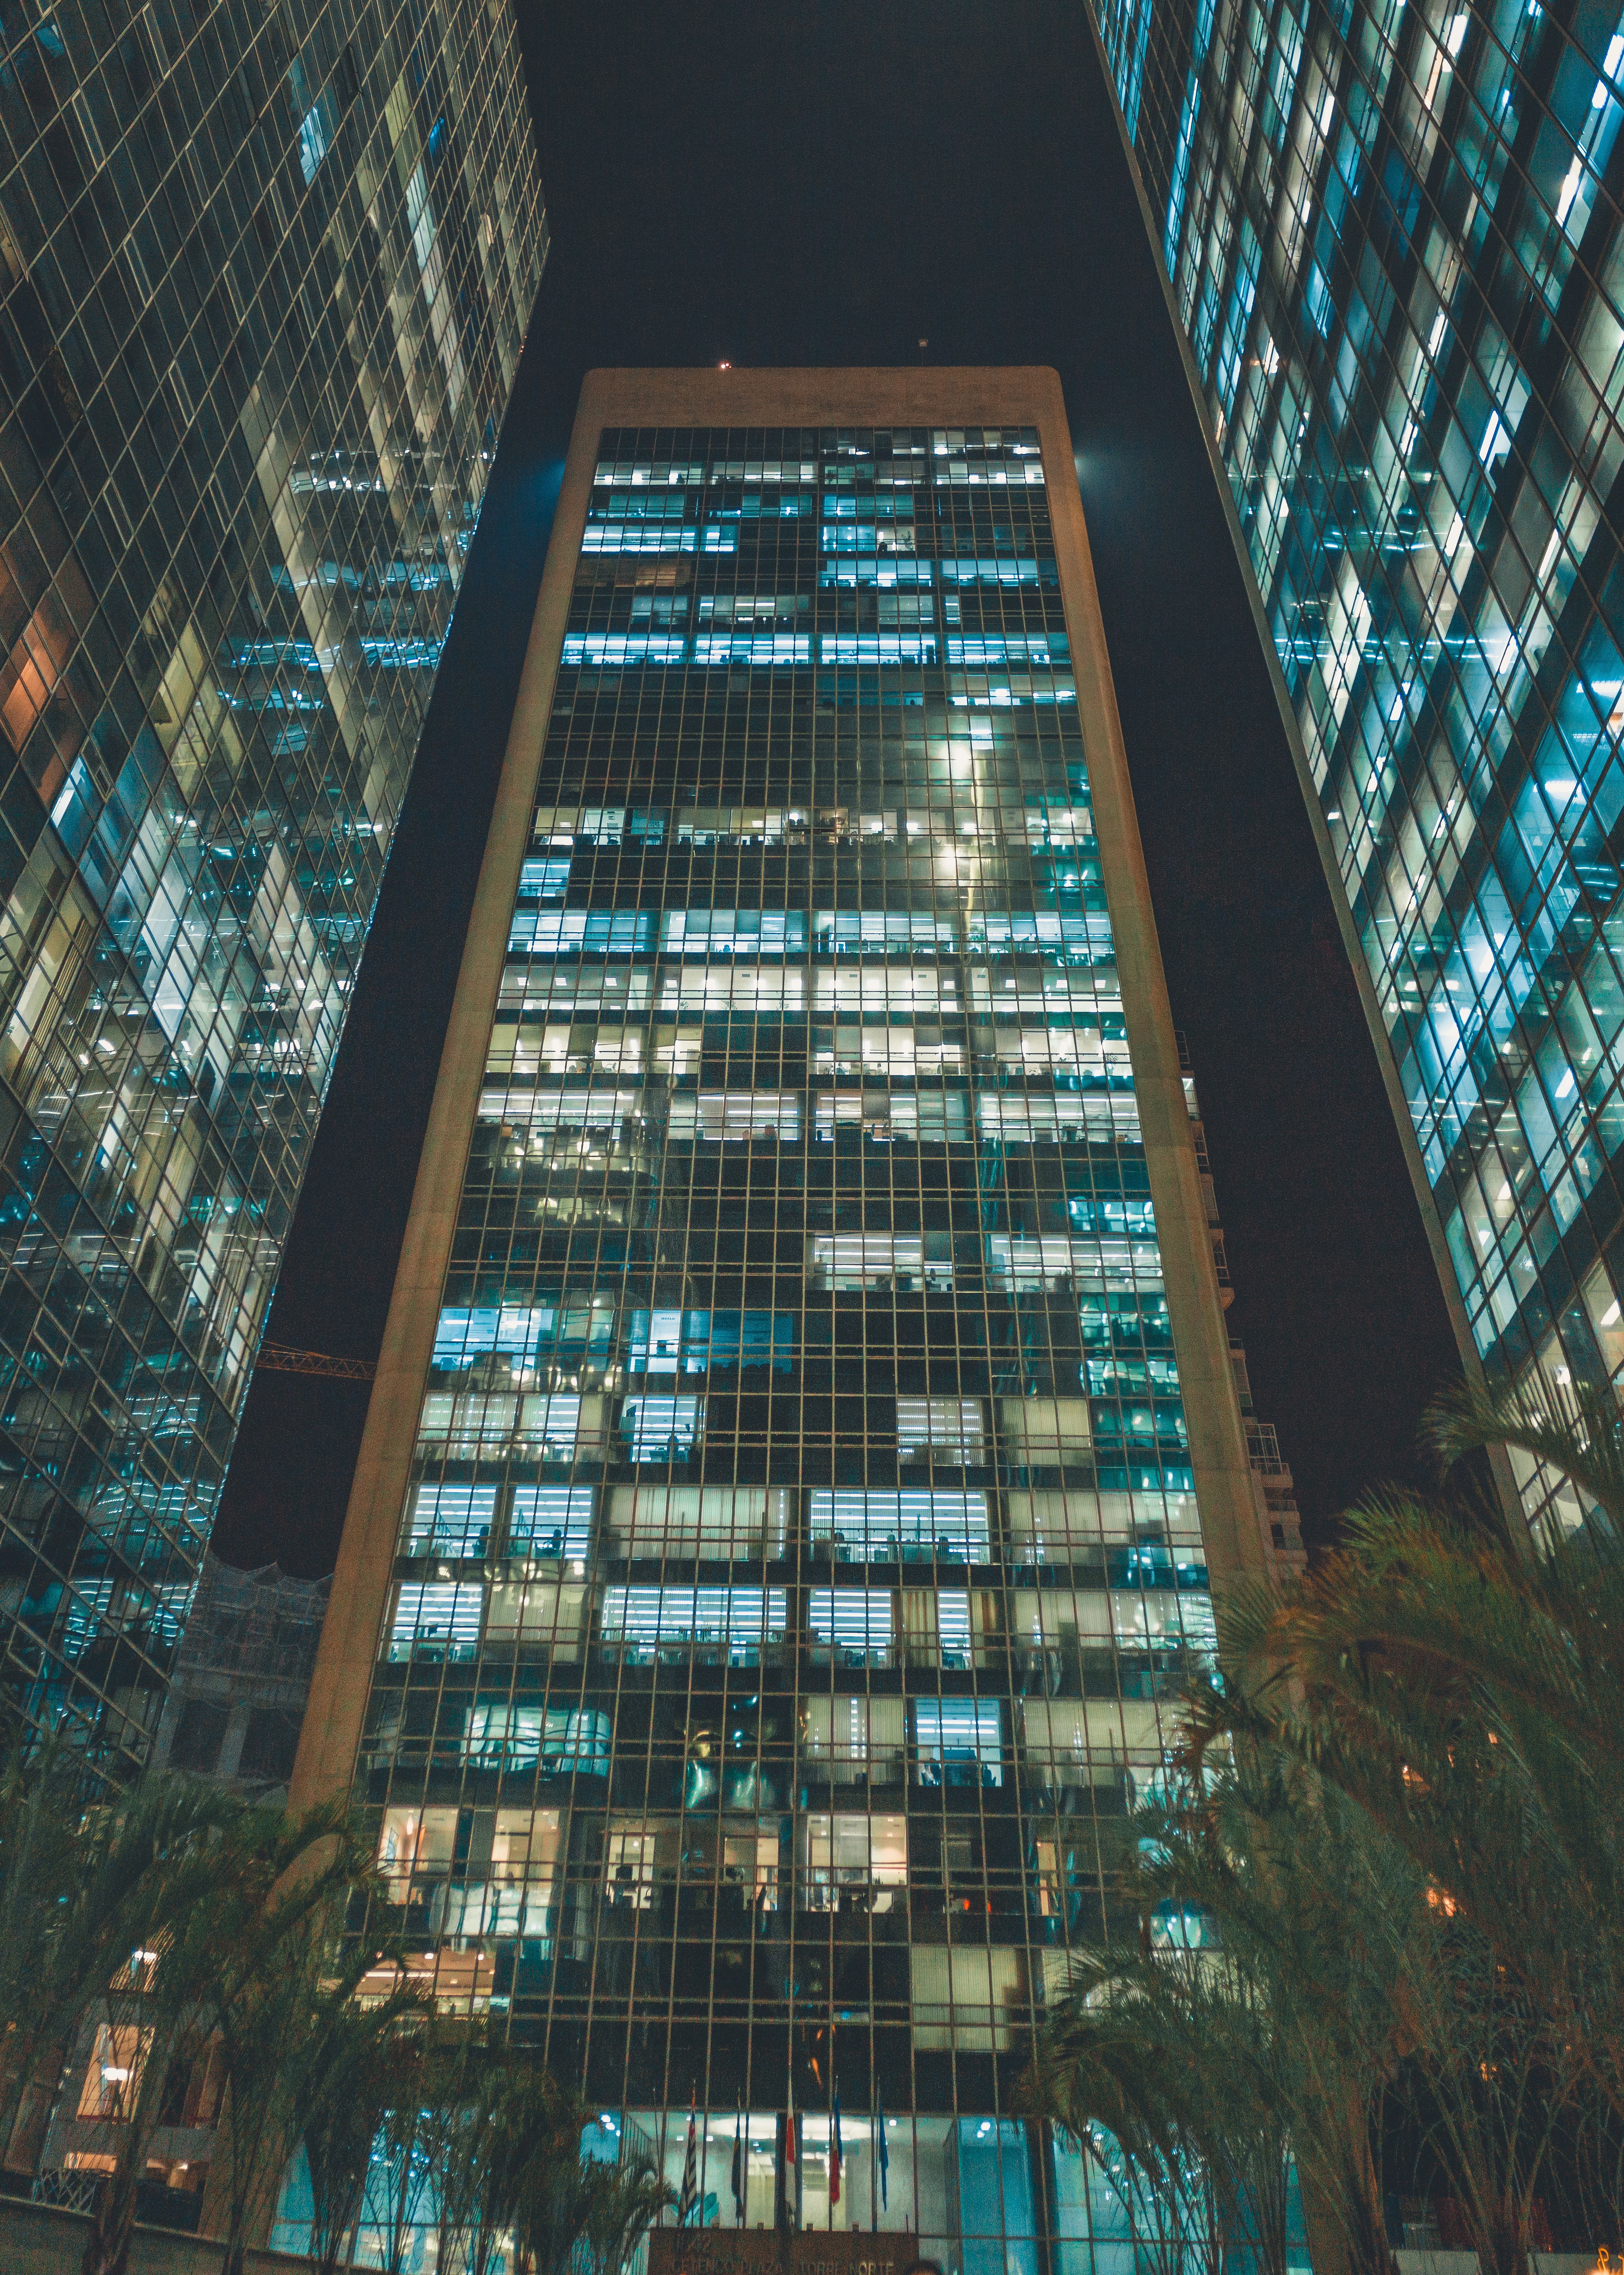 Tall Buildings At Night Time · Free